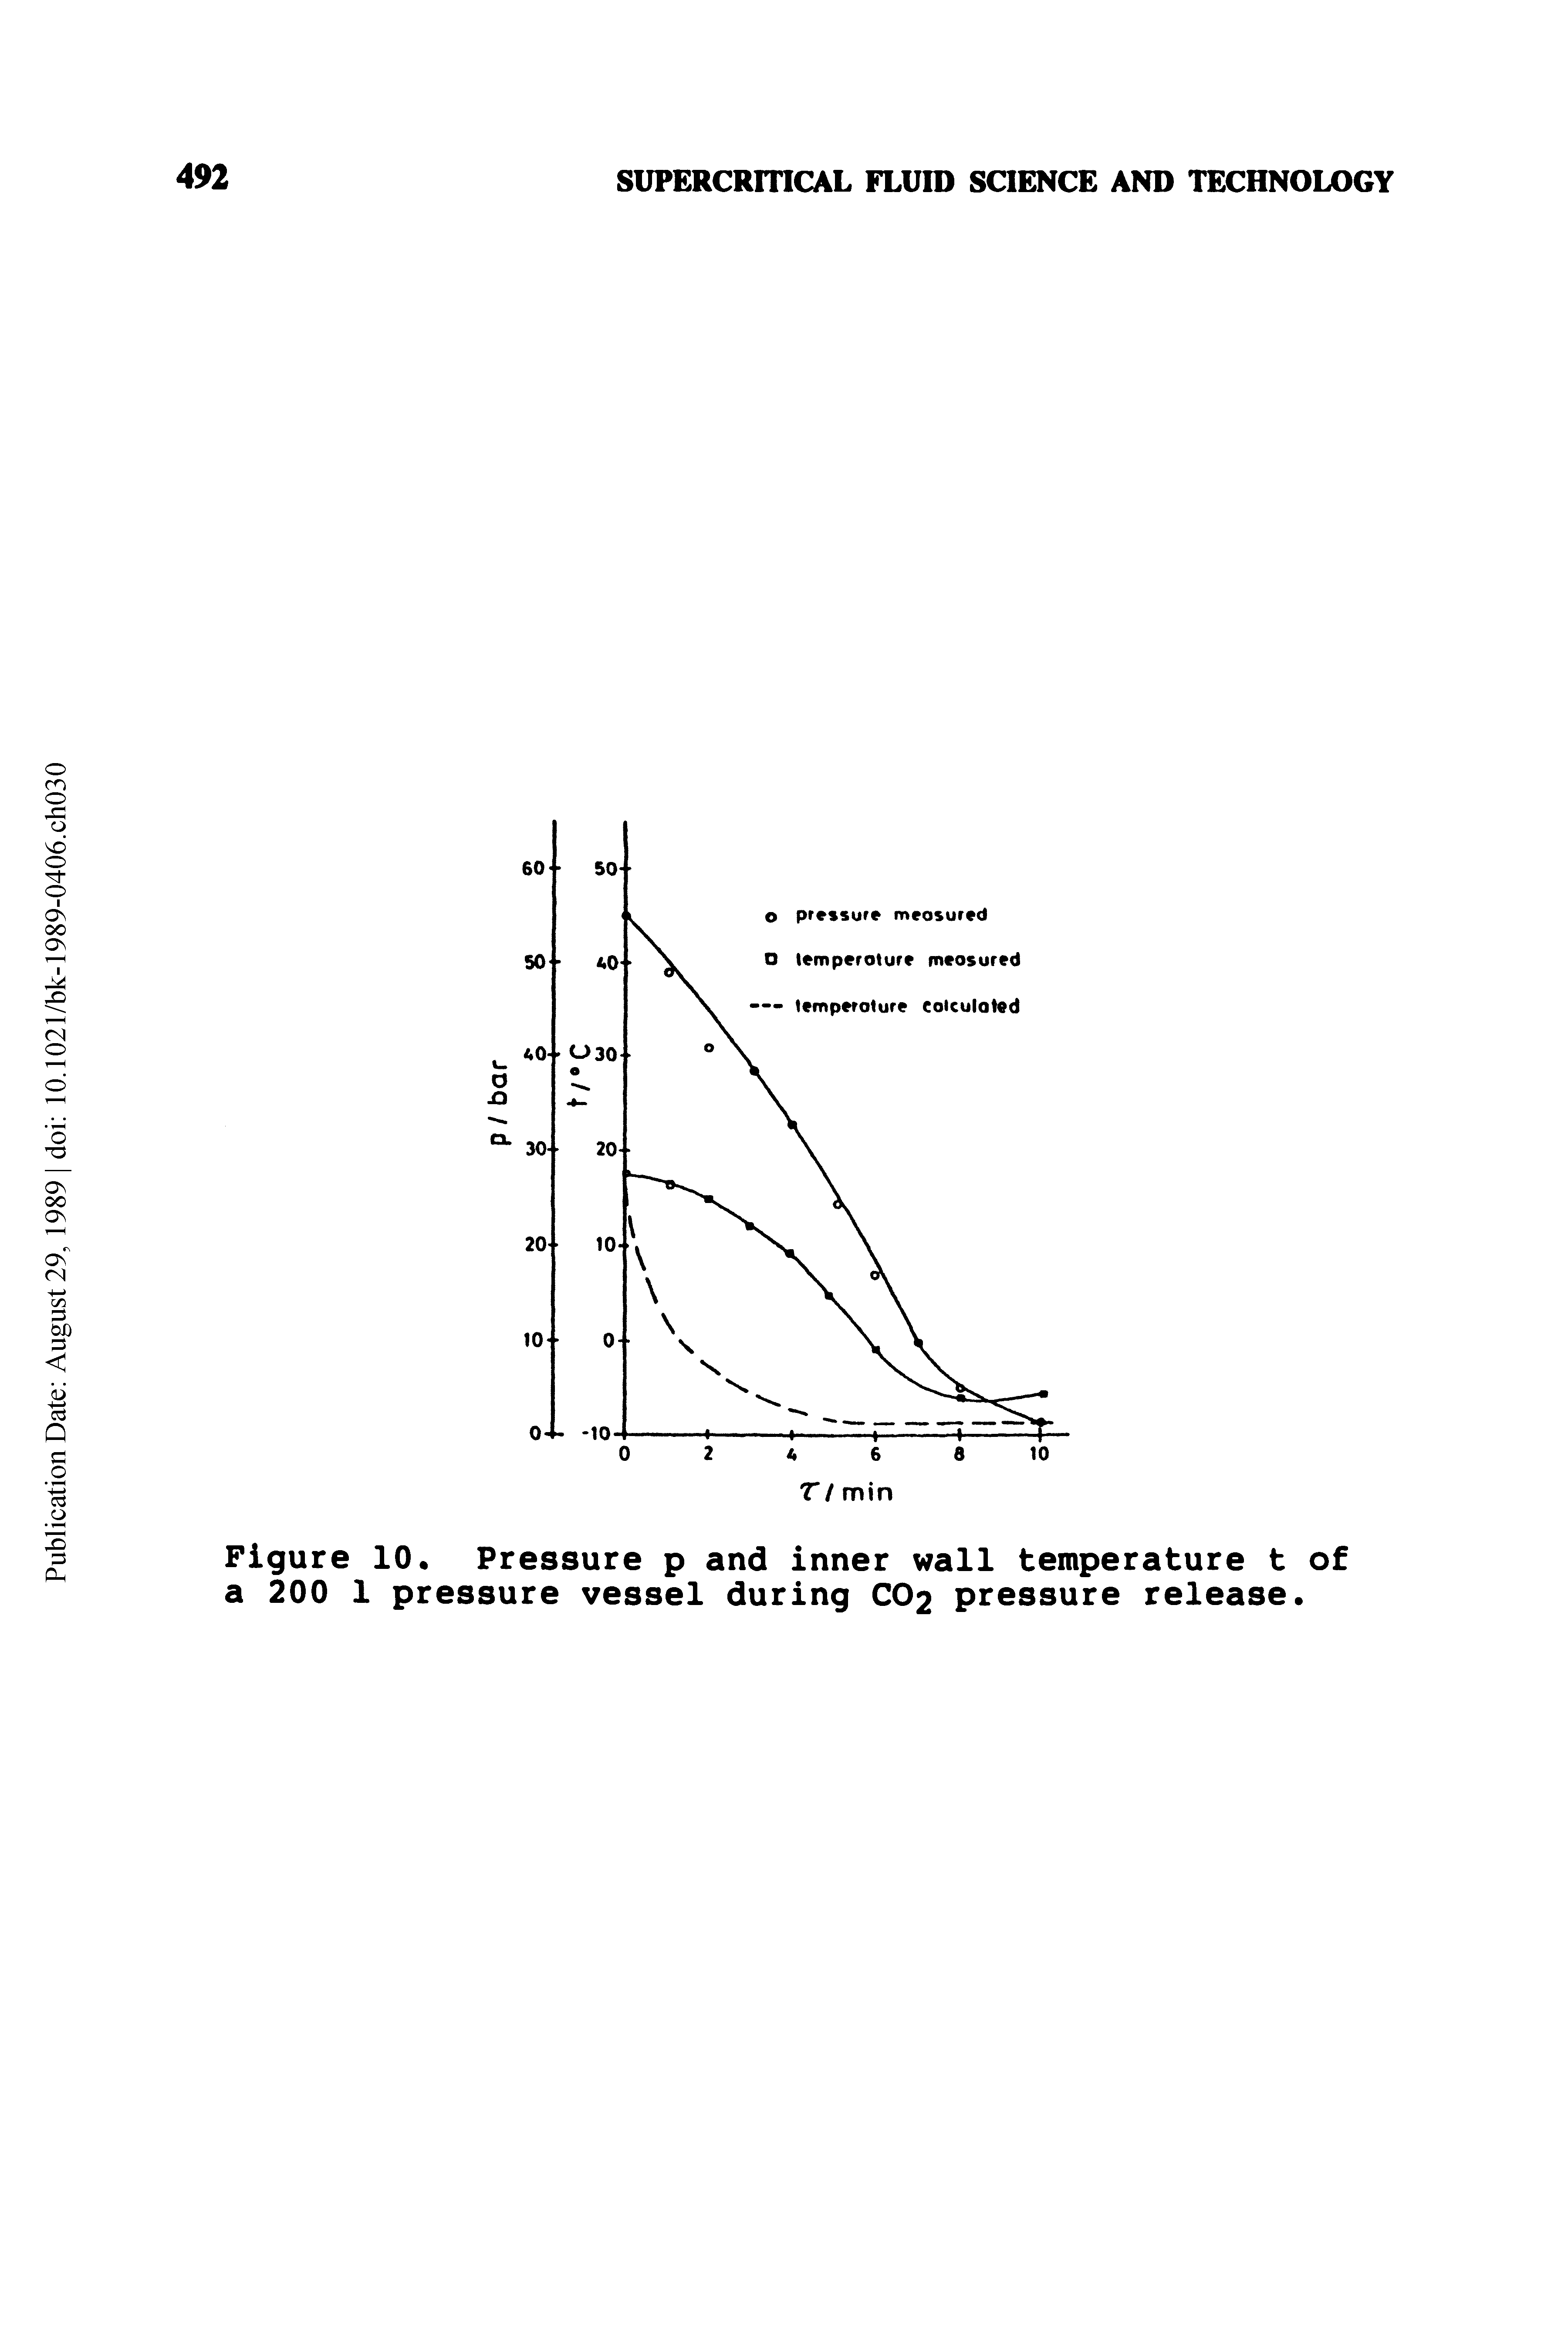 Figure 10. Pressure p and inner wall temperature t of a 200 1 pressure vessel during CO2 pressure release.